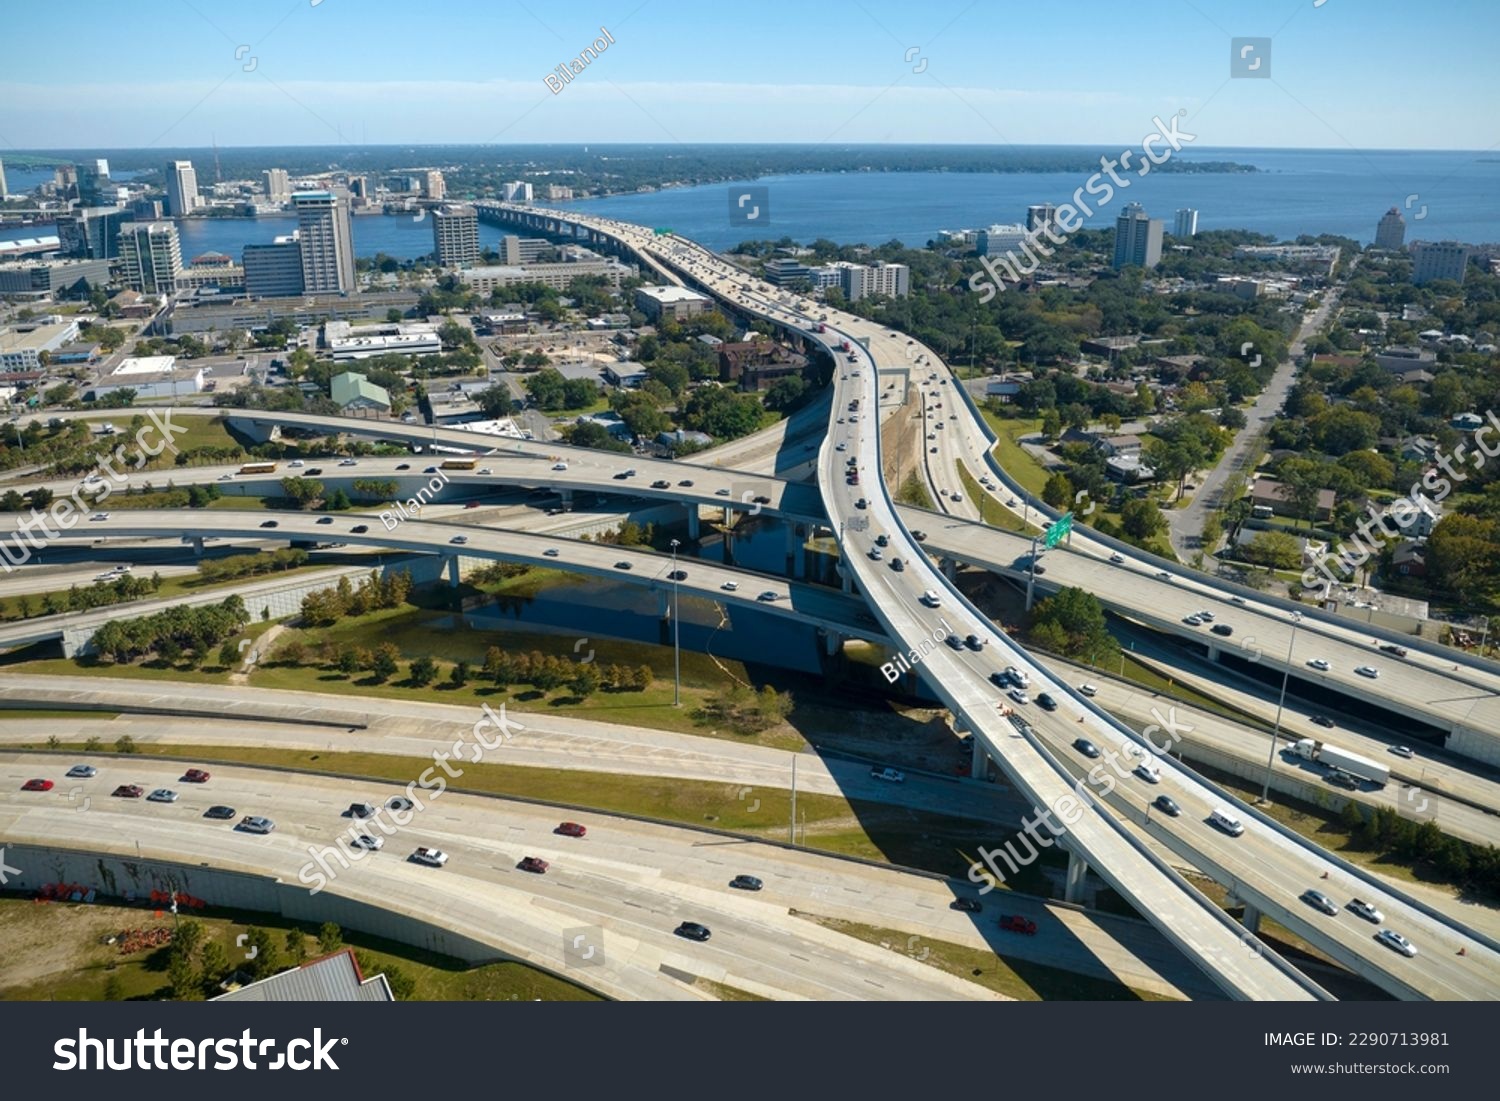 Aerial view of american freeway intersection with fast moving cars and trucks. USA transportation infrastructure concept #2290713981